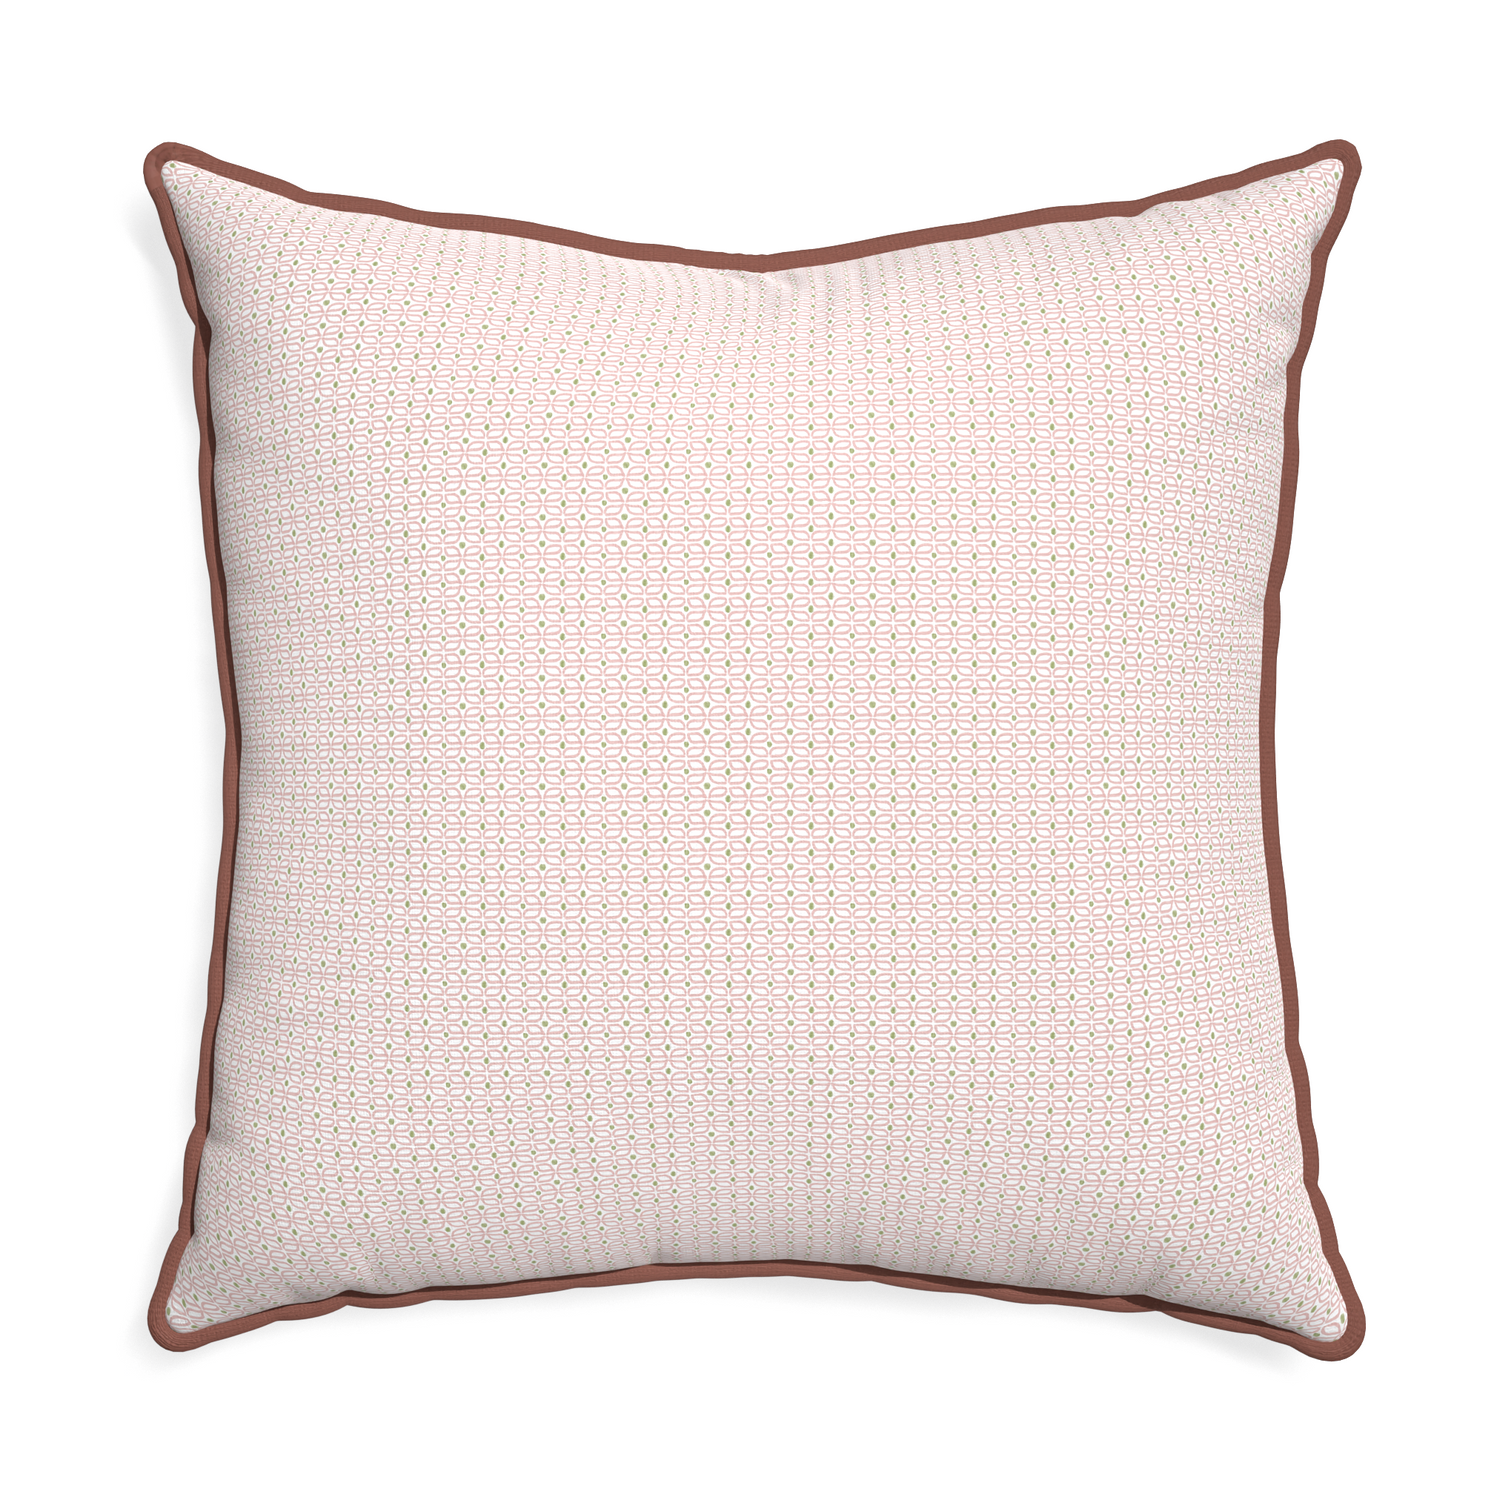 Euro-sham loomi pink custom pillow with w piping on white background